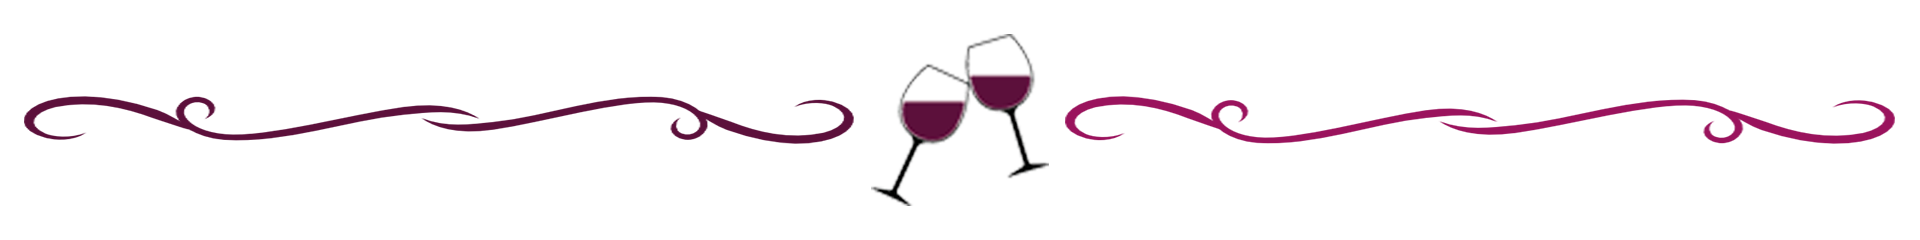 WINE page break  glasses.png